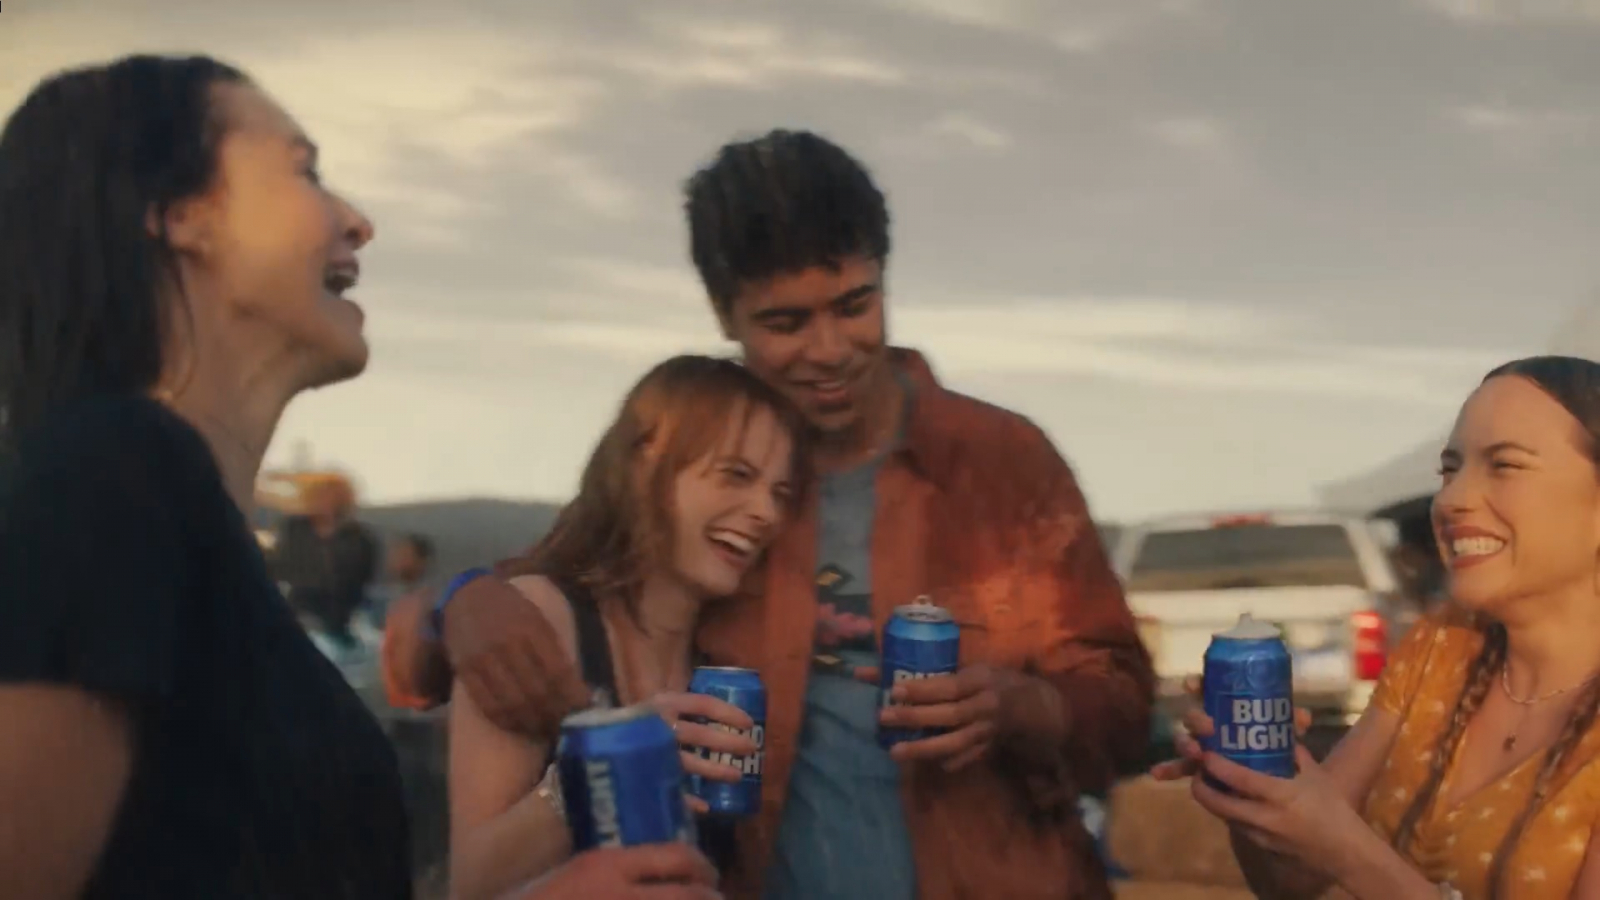 Bud Light Faces Further Backlash After It Turns Off YouTube Comments on